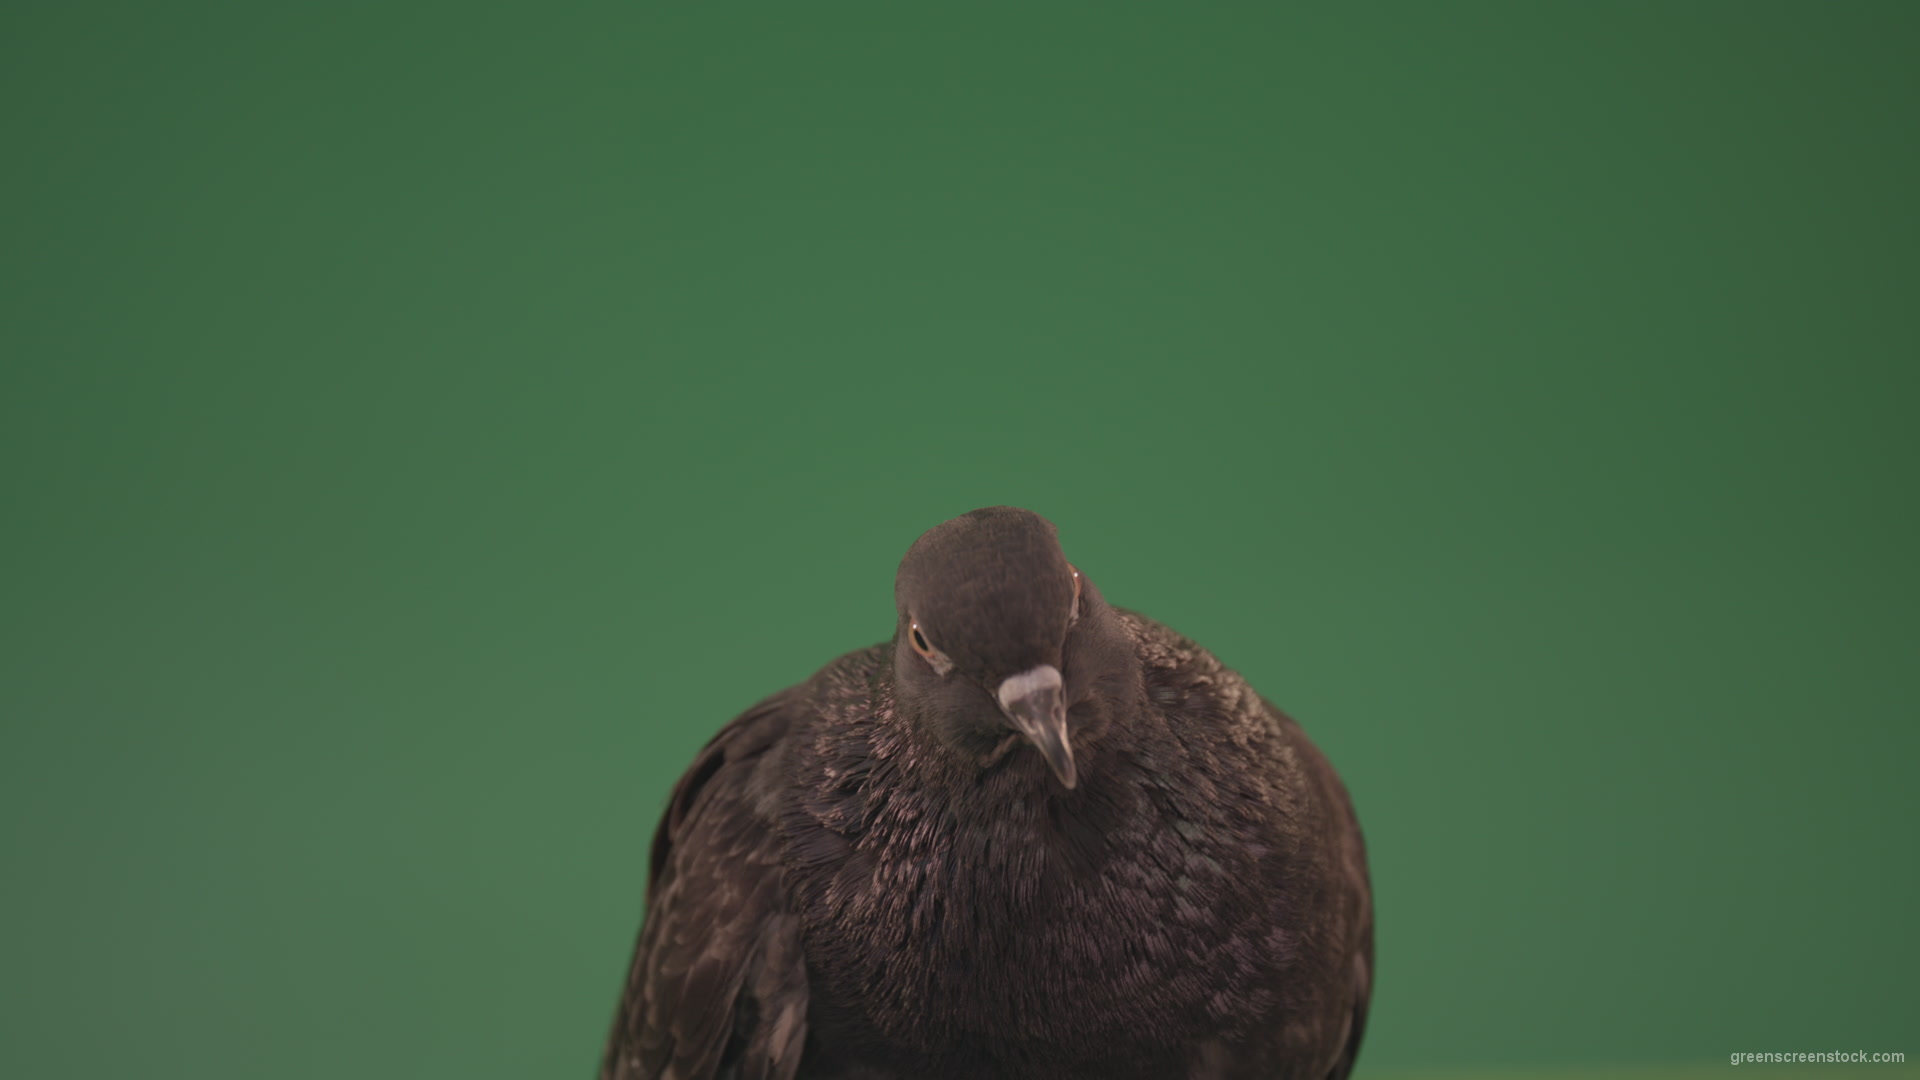 Pigeon-came-to-rest-after-a-long-flight-isolated-on-chromakey-background_002 Green Screen Stock